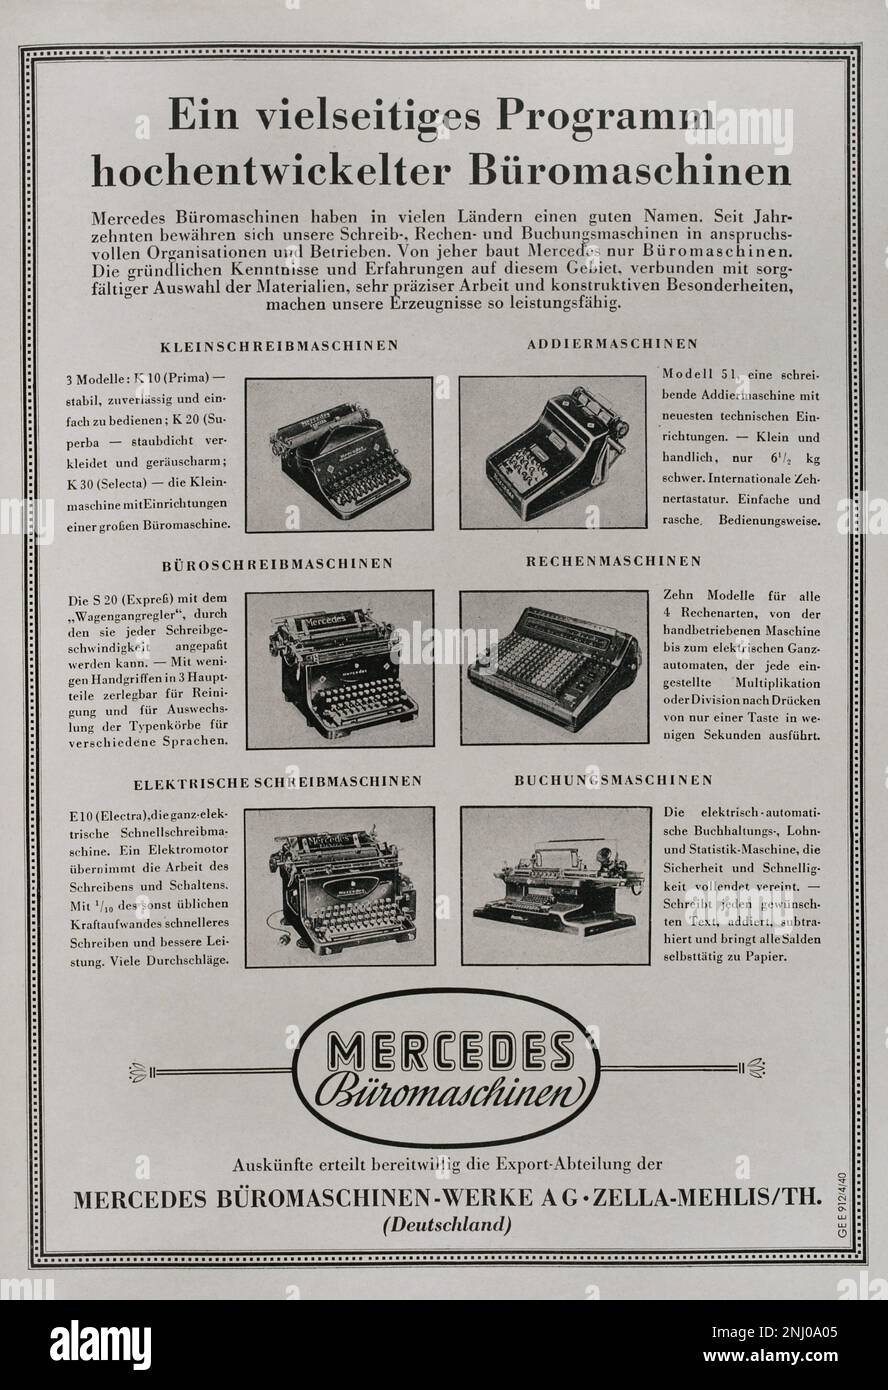 Advertisement for Mercedes office machines (Mercedes Bureau-Maschinen GmbH) on one of the inside pages of the magazine 'Signal', issue No 9 (10 August 1940) of the German-Italian edition. This magazine was published between April 1940 and April 1945 and was the main propaganda organ of the German army during the Second World War. Stock Photo